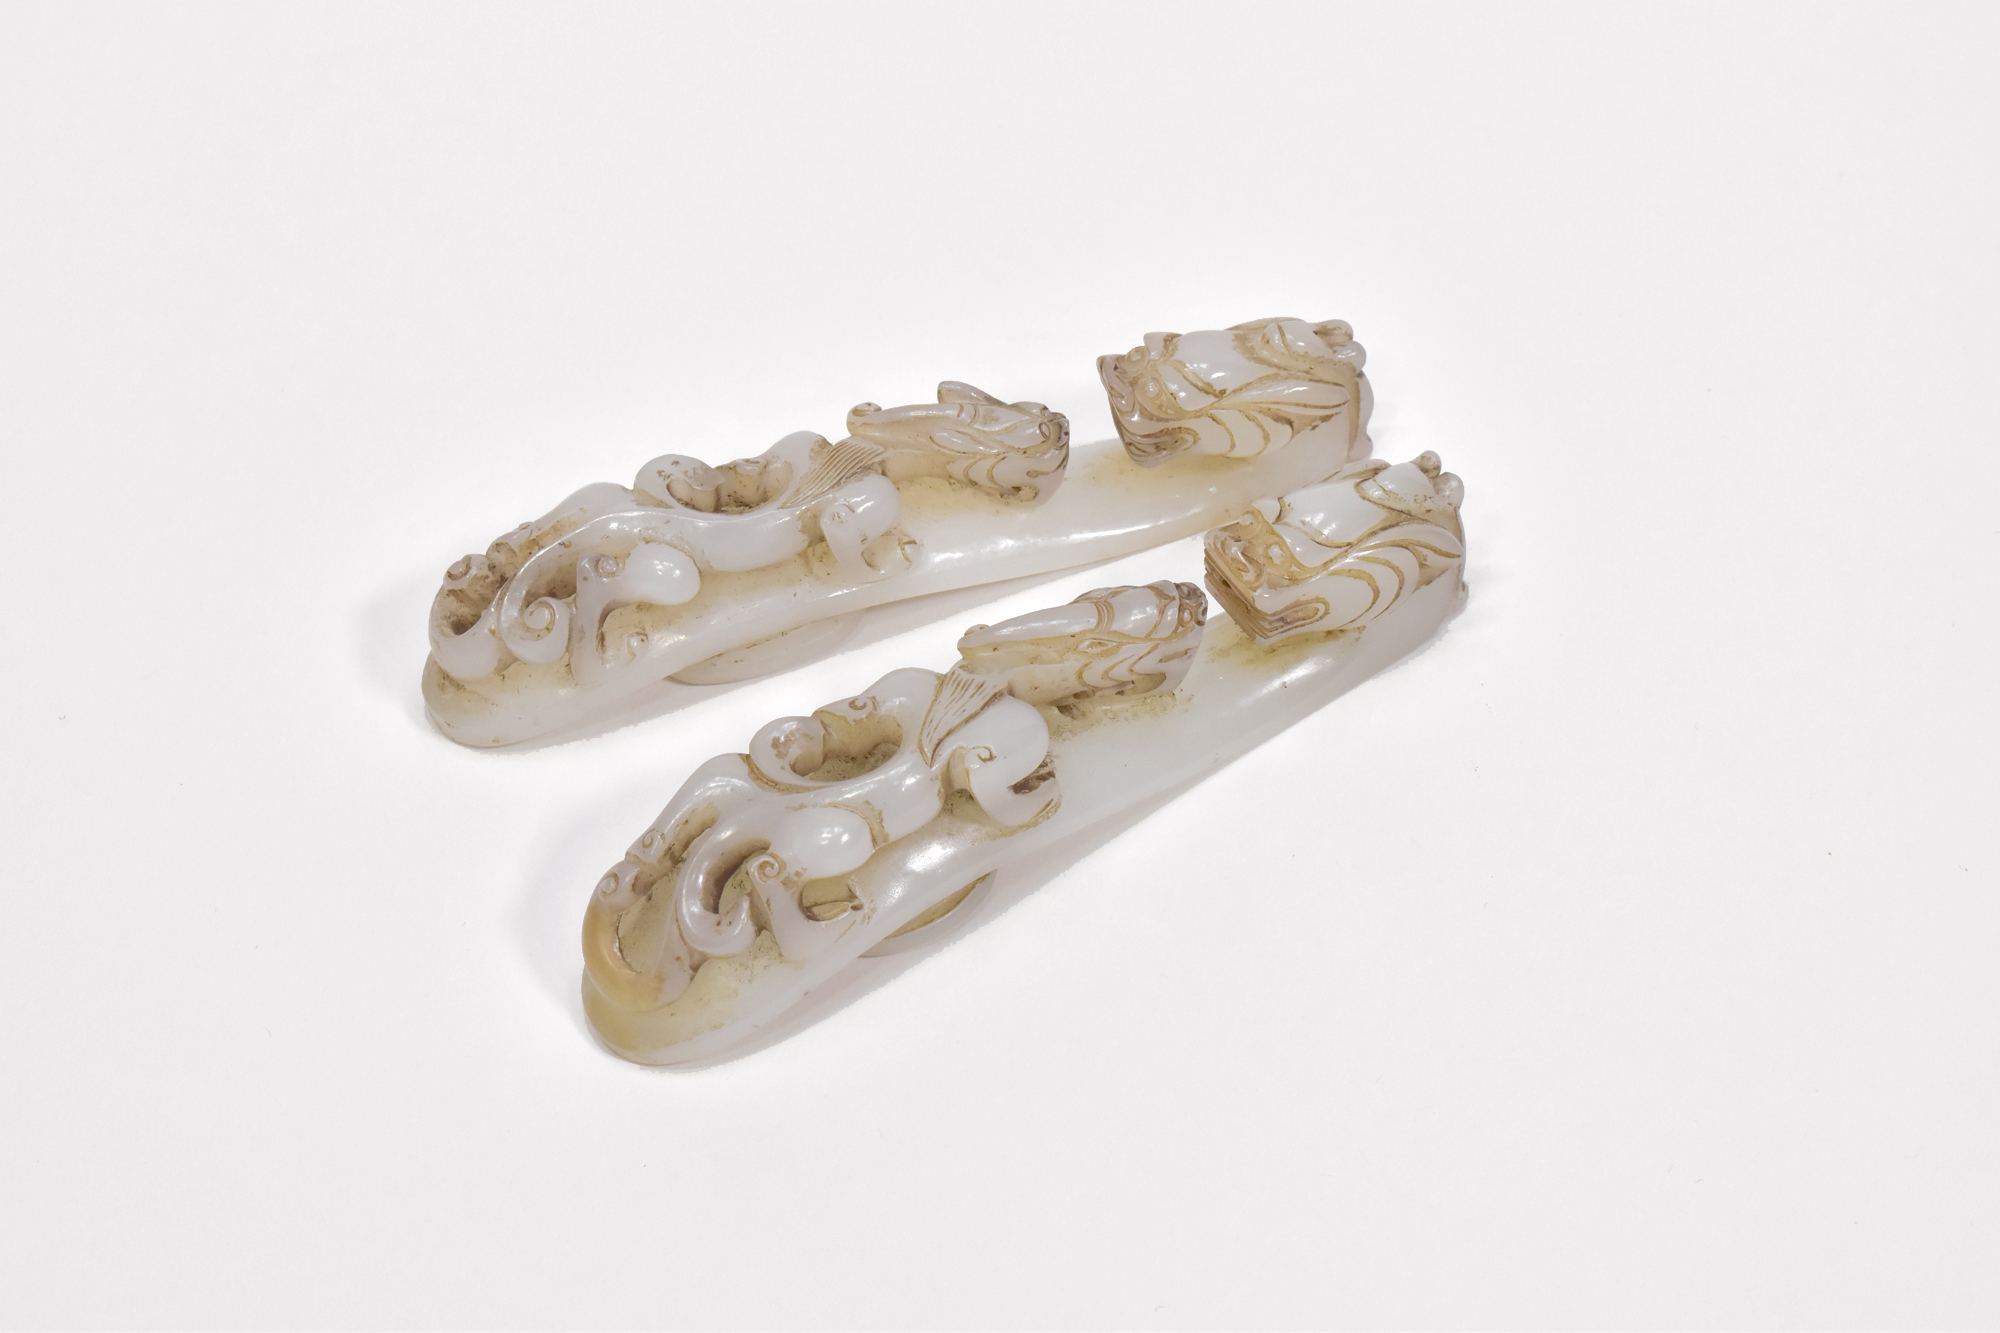 A PAIR OF CHINESE PALE CELADON JADE ‘DRAGON’ BELT HOOKS, QING DYNASTY, 19TH CENTURY